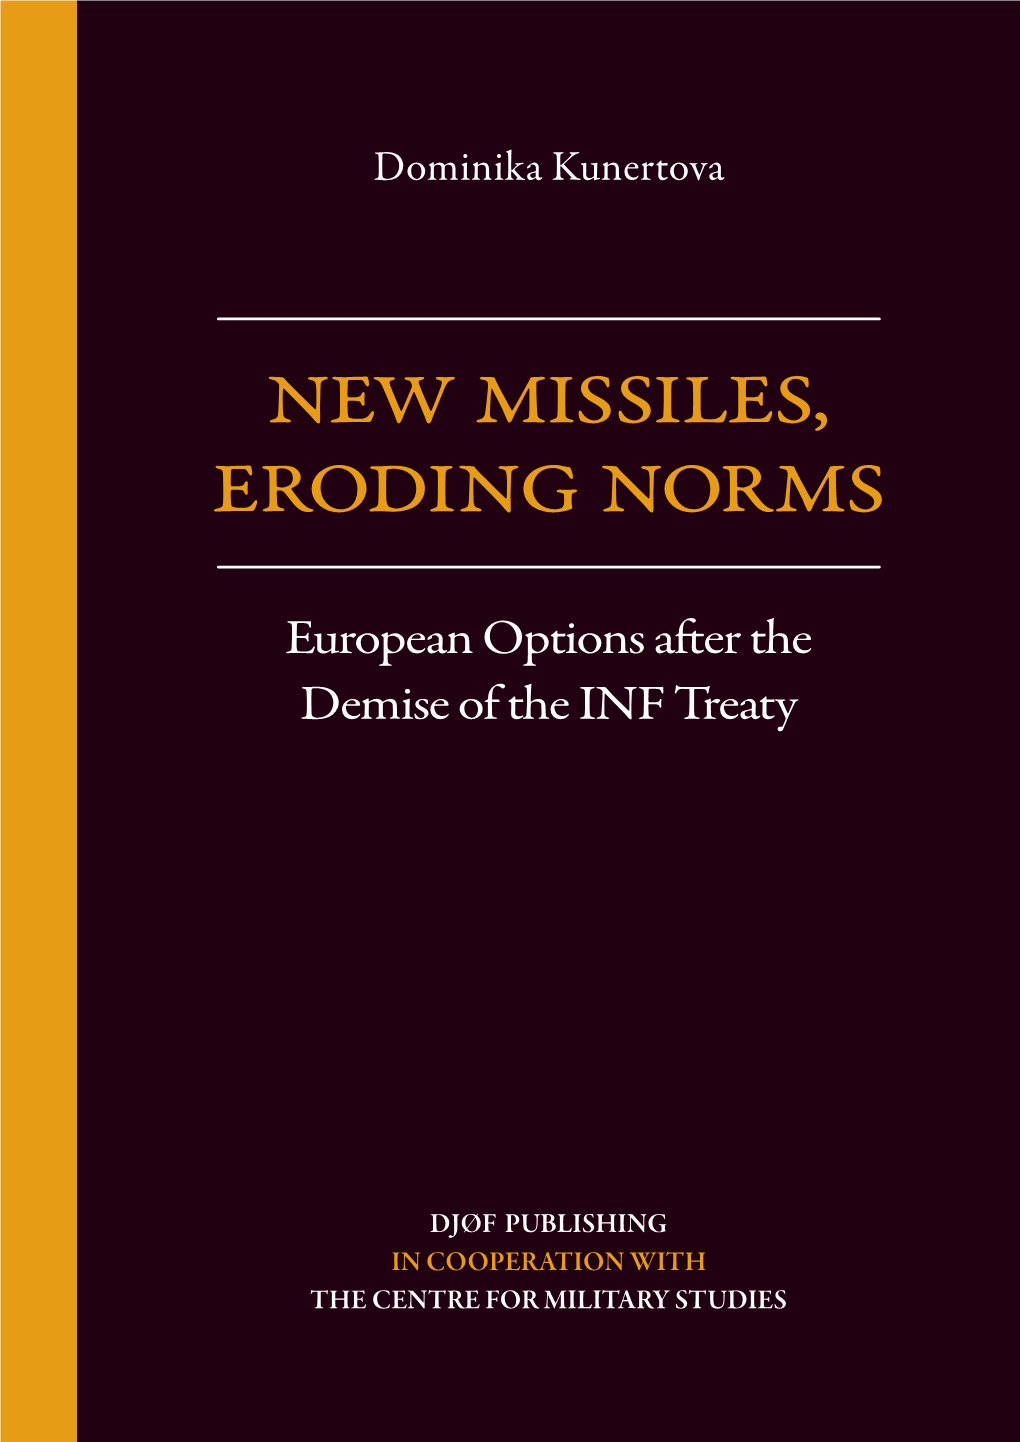 New Missiles, Eroding Norms